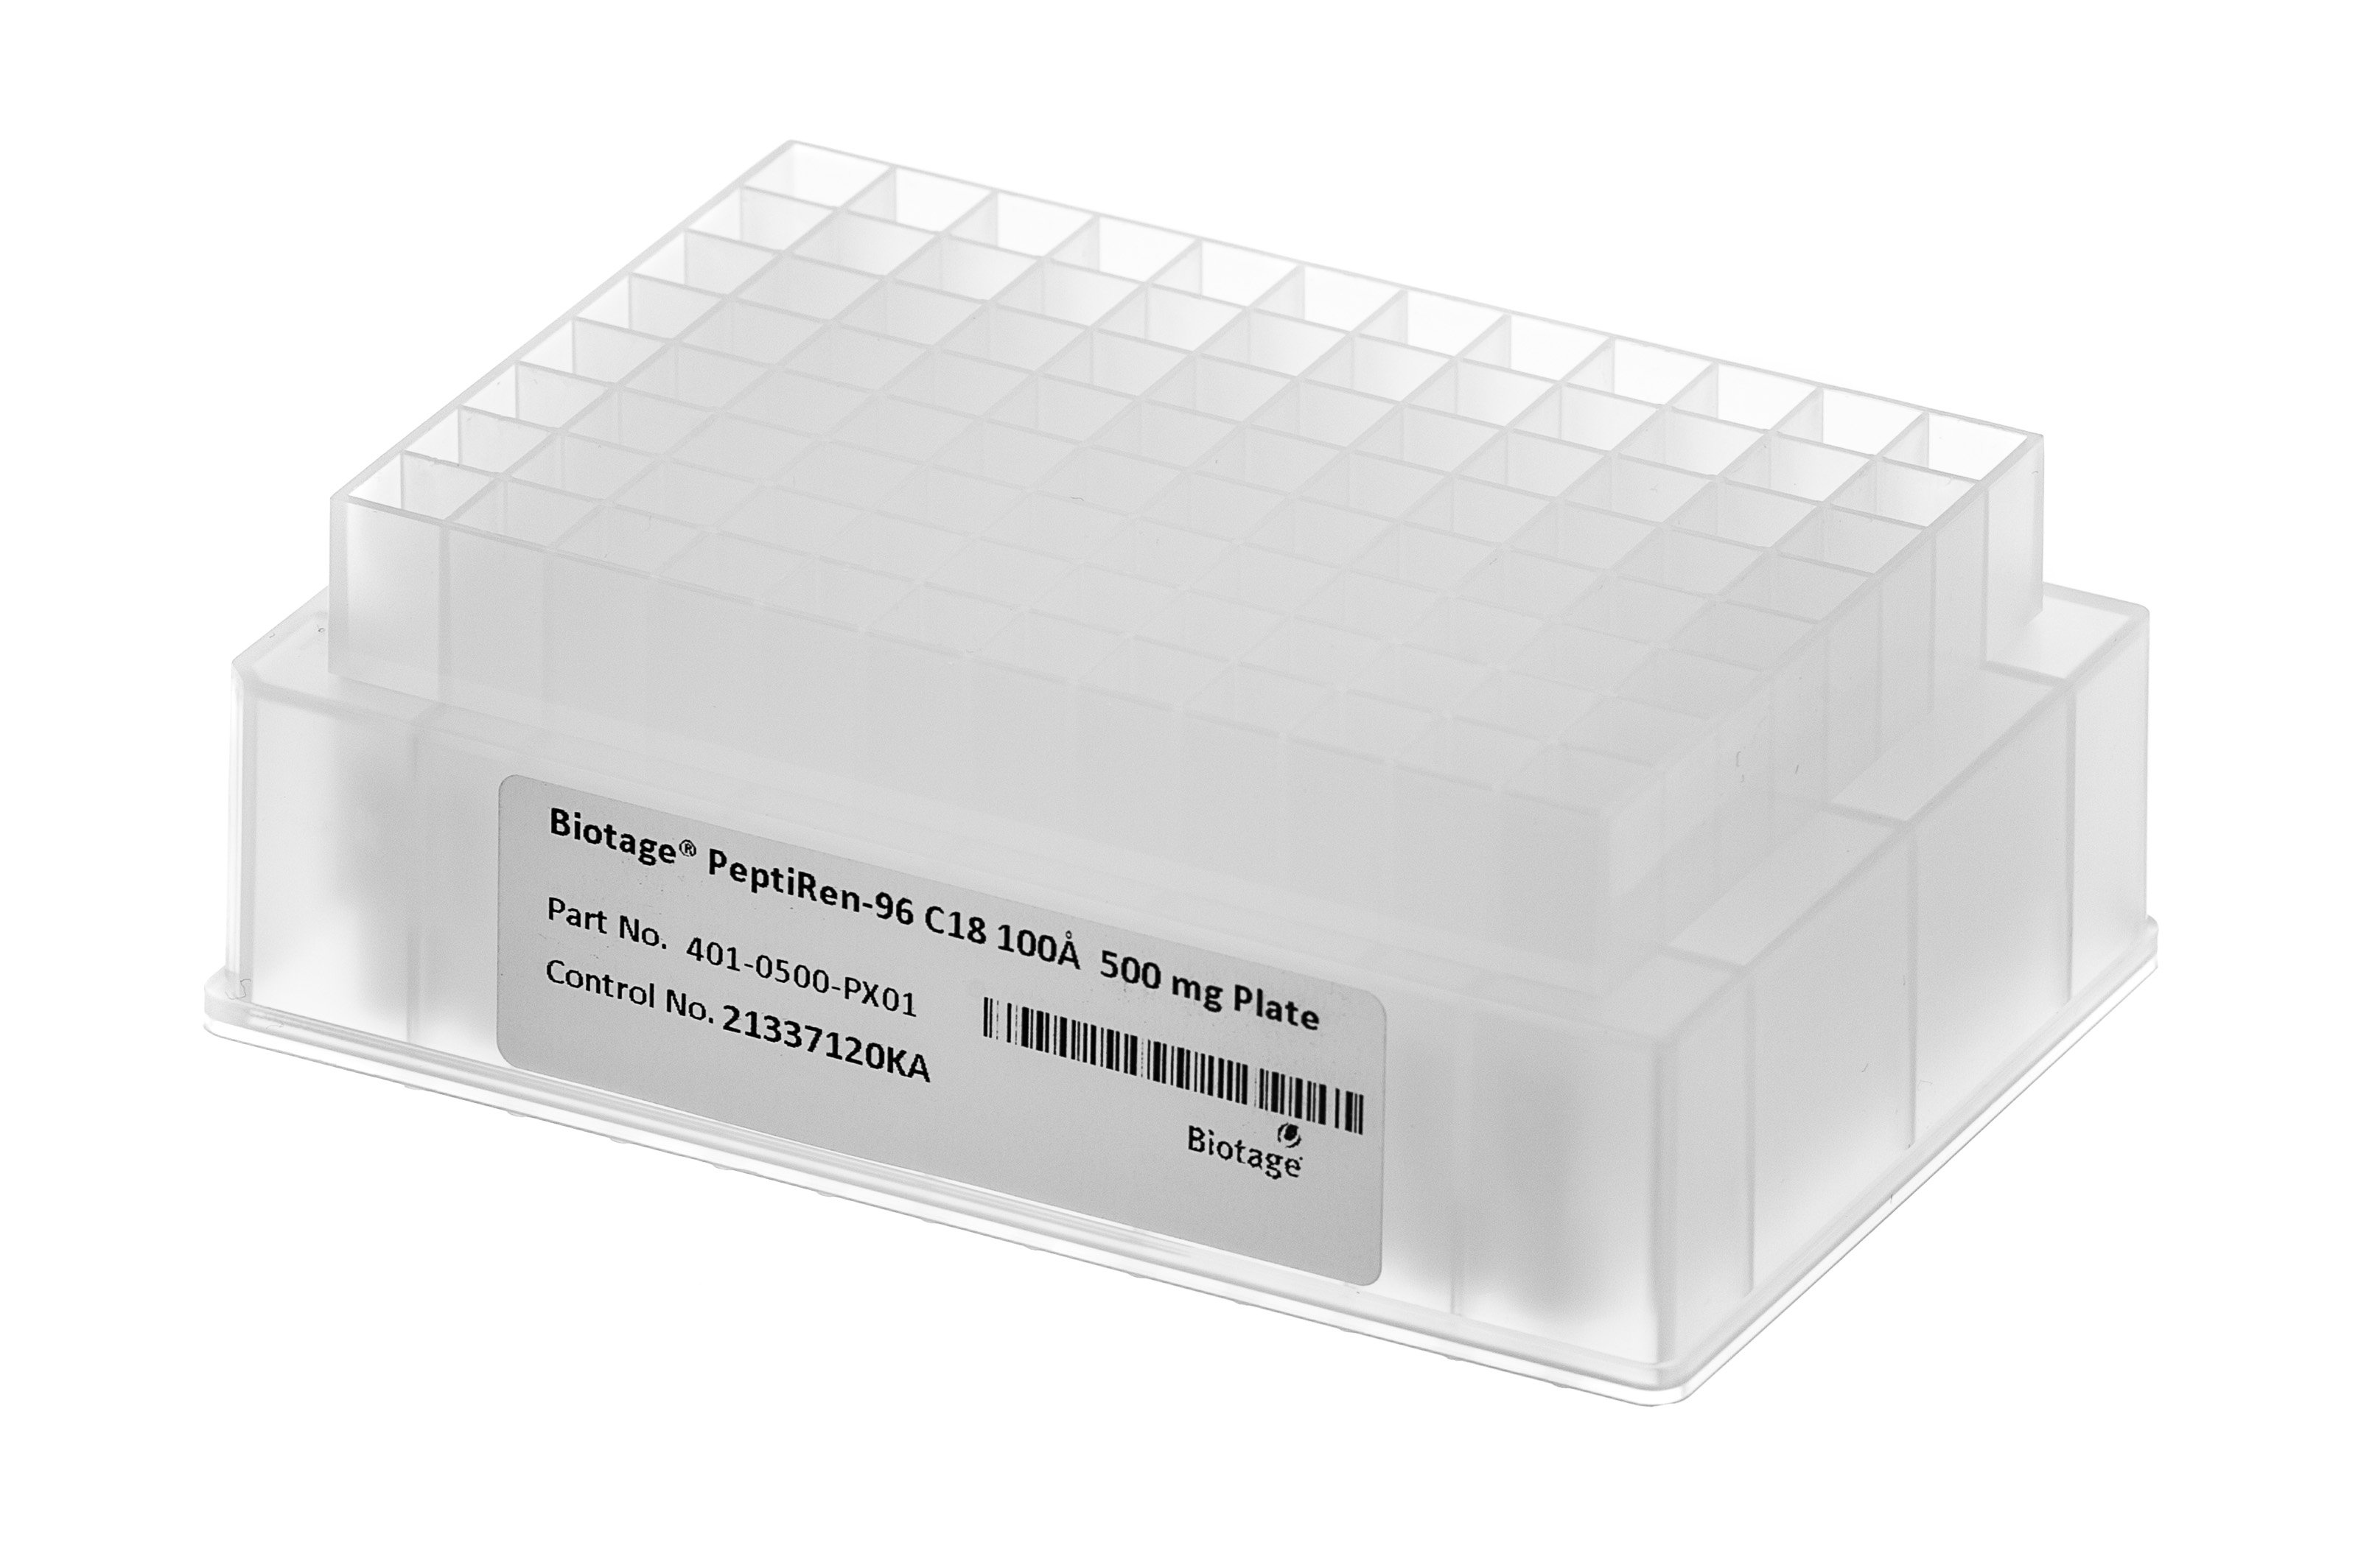 Biotage launches PeptiRen-96 plates for parallel peptide purification